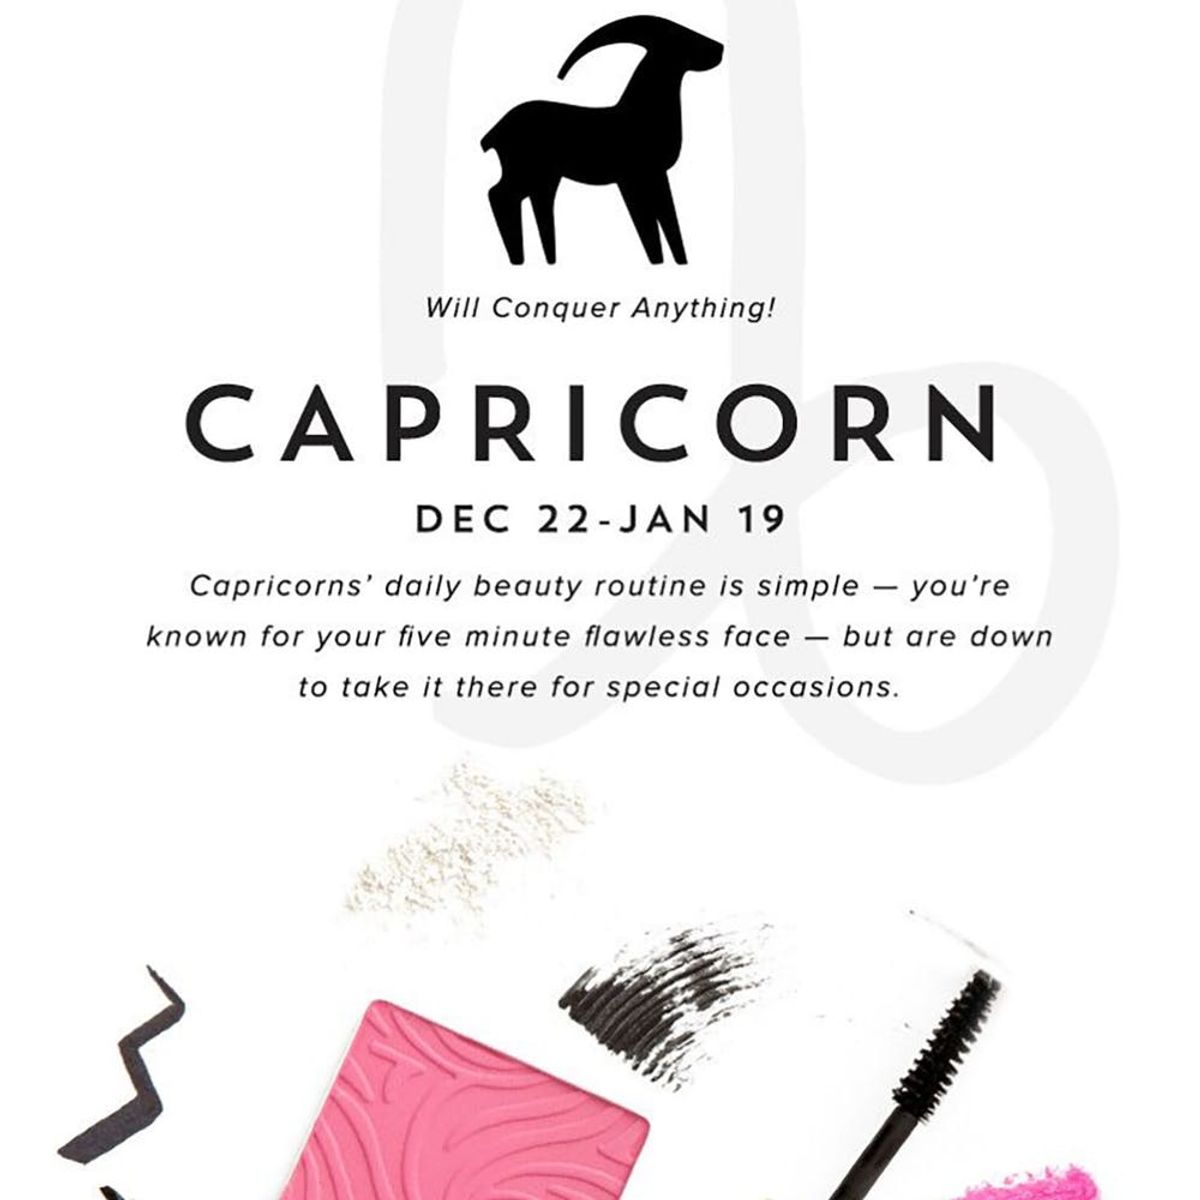 The Best Makeup for Your Zodiac Sign: Capricorn Edition